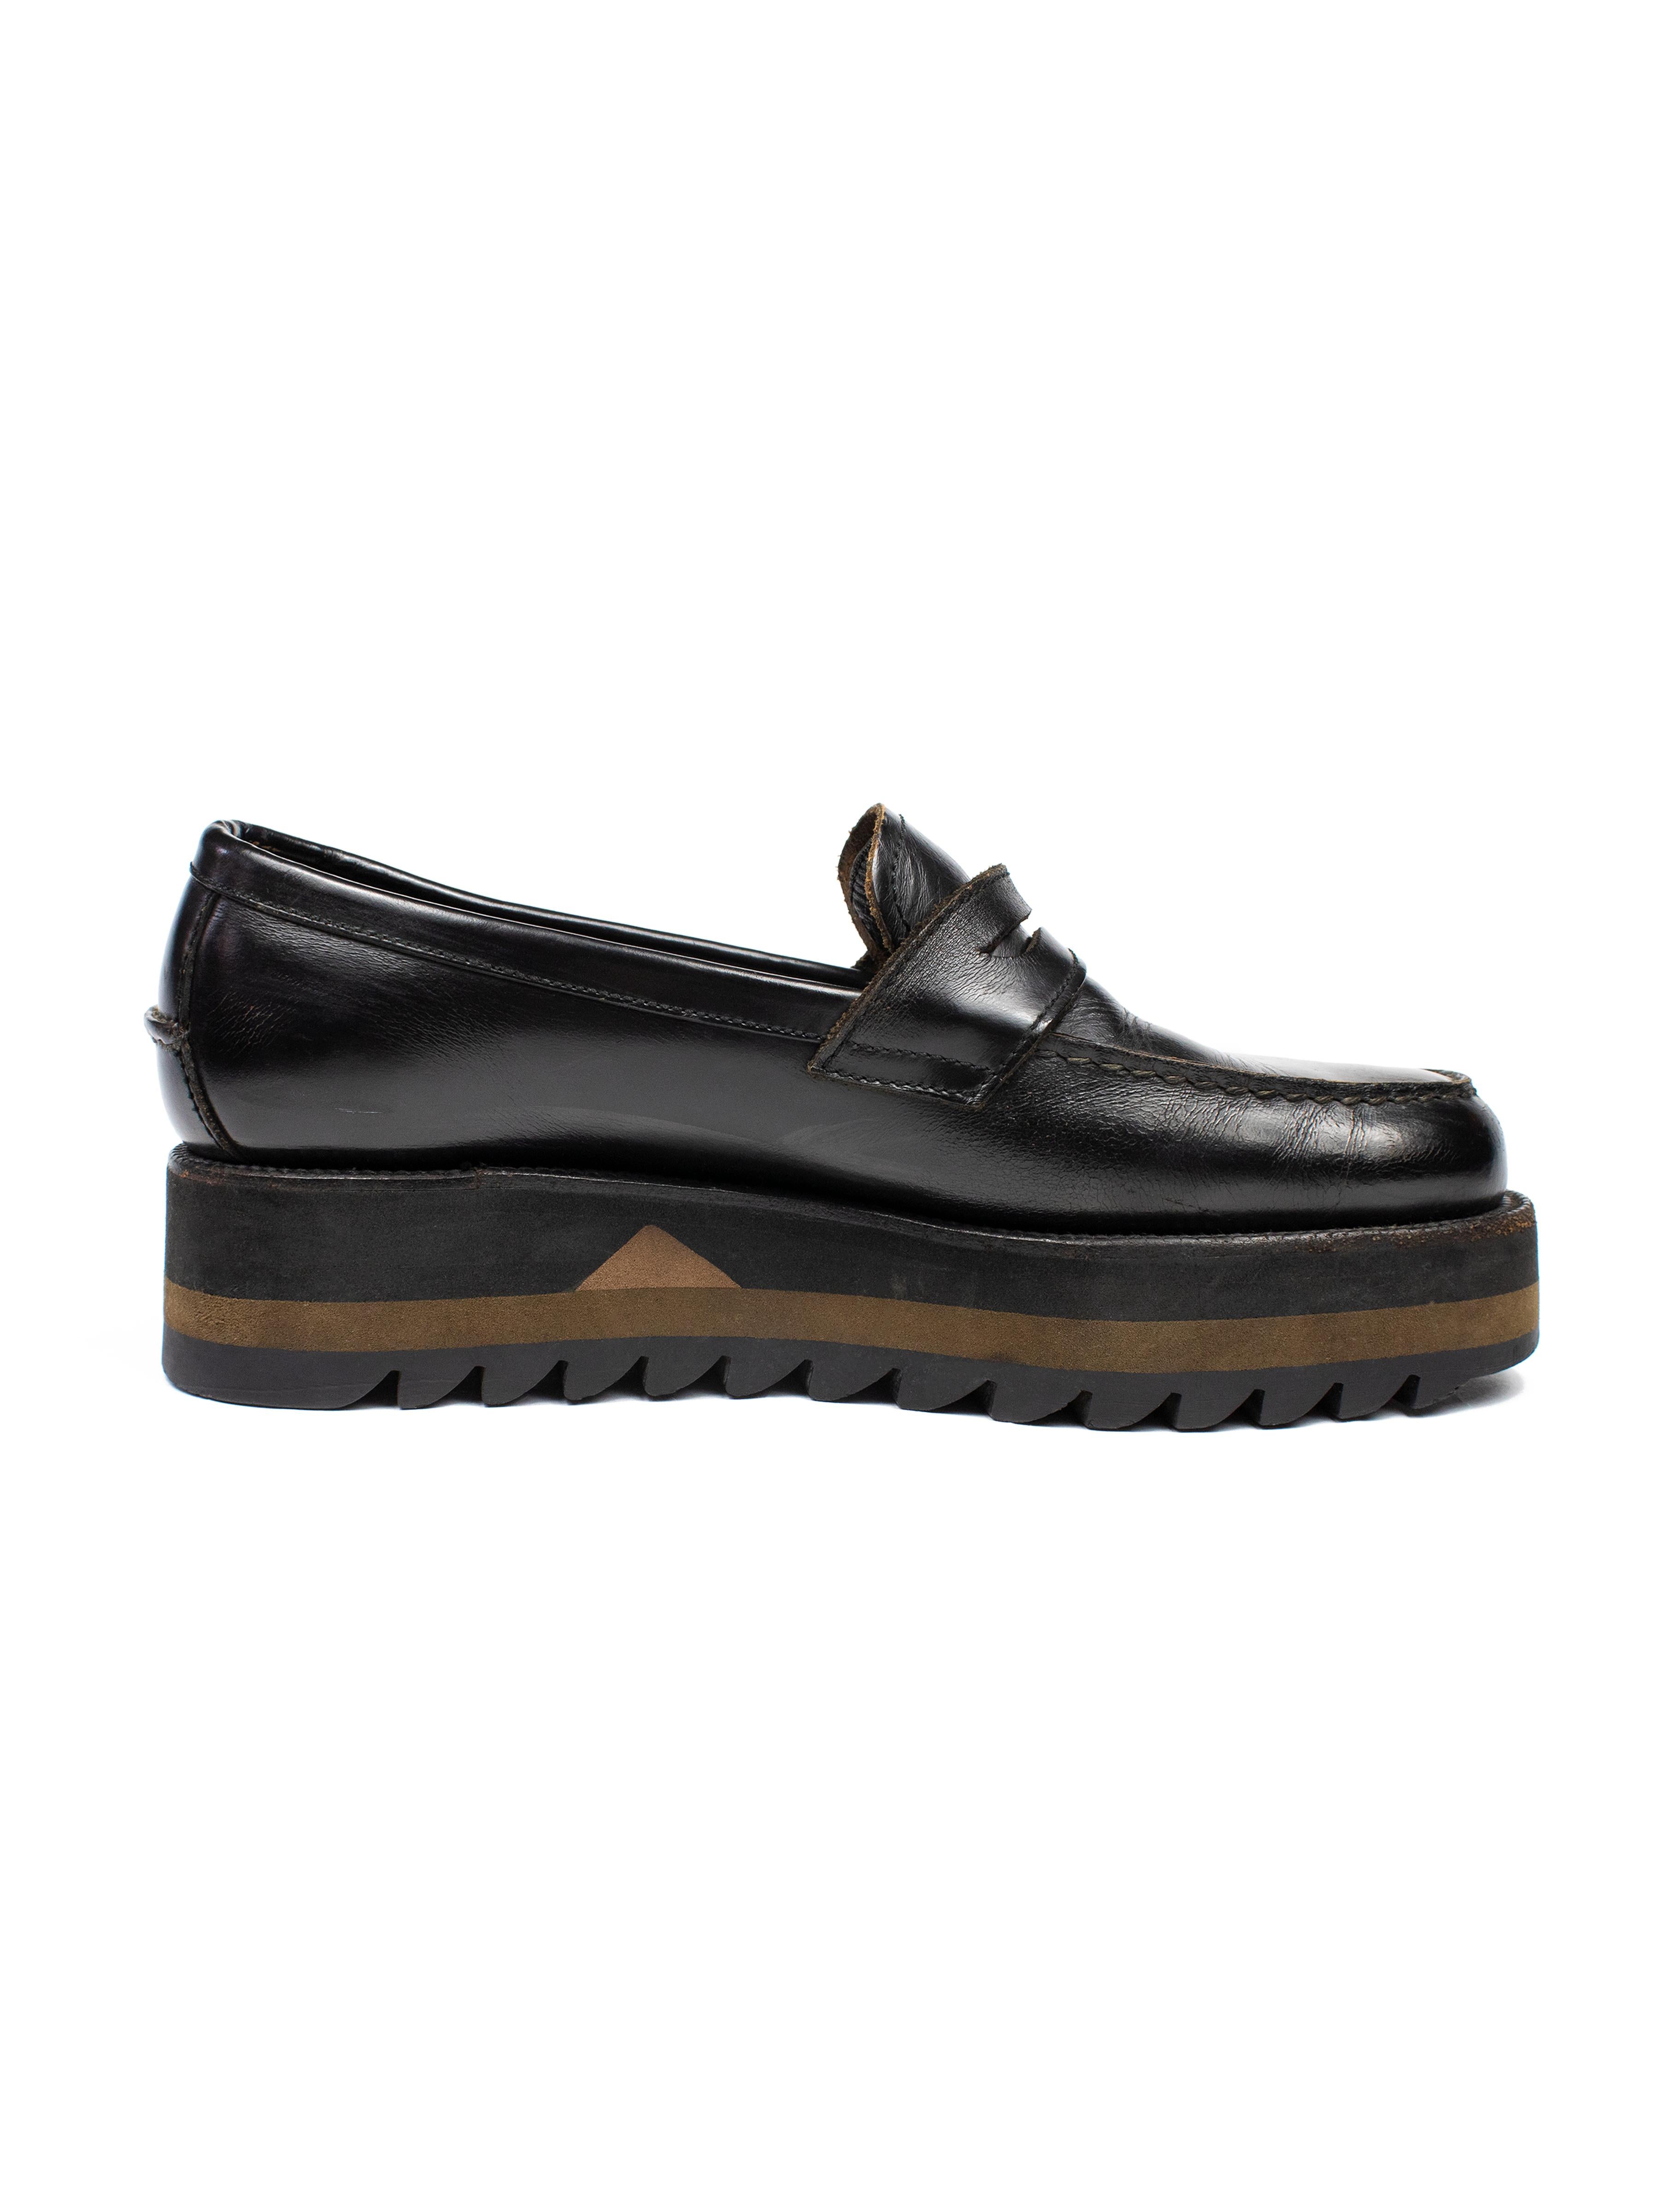 Comme des Garçons Homme Plus AW1994 Shark Sole Loafers at 1stDibs